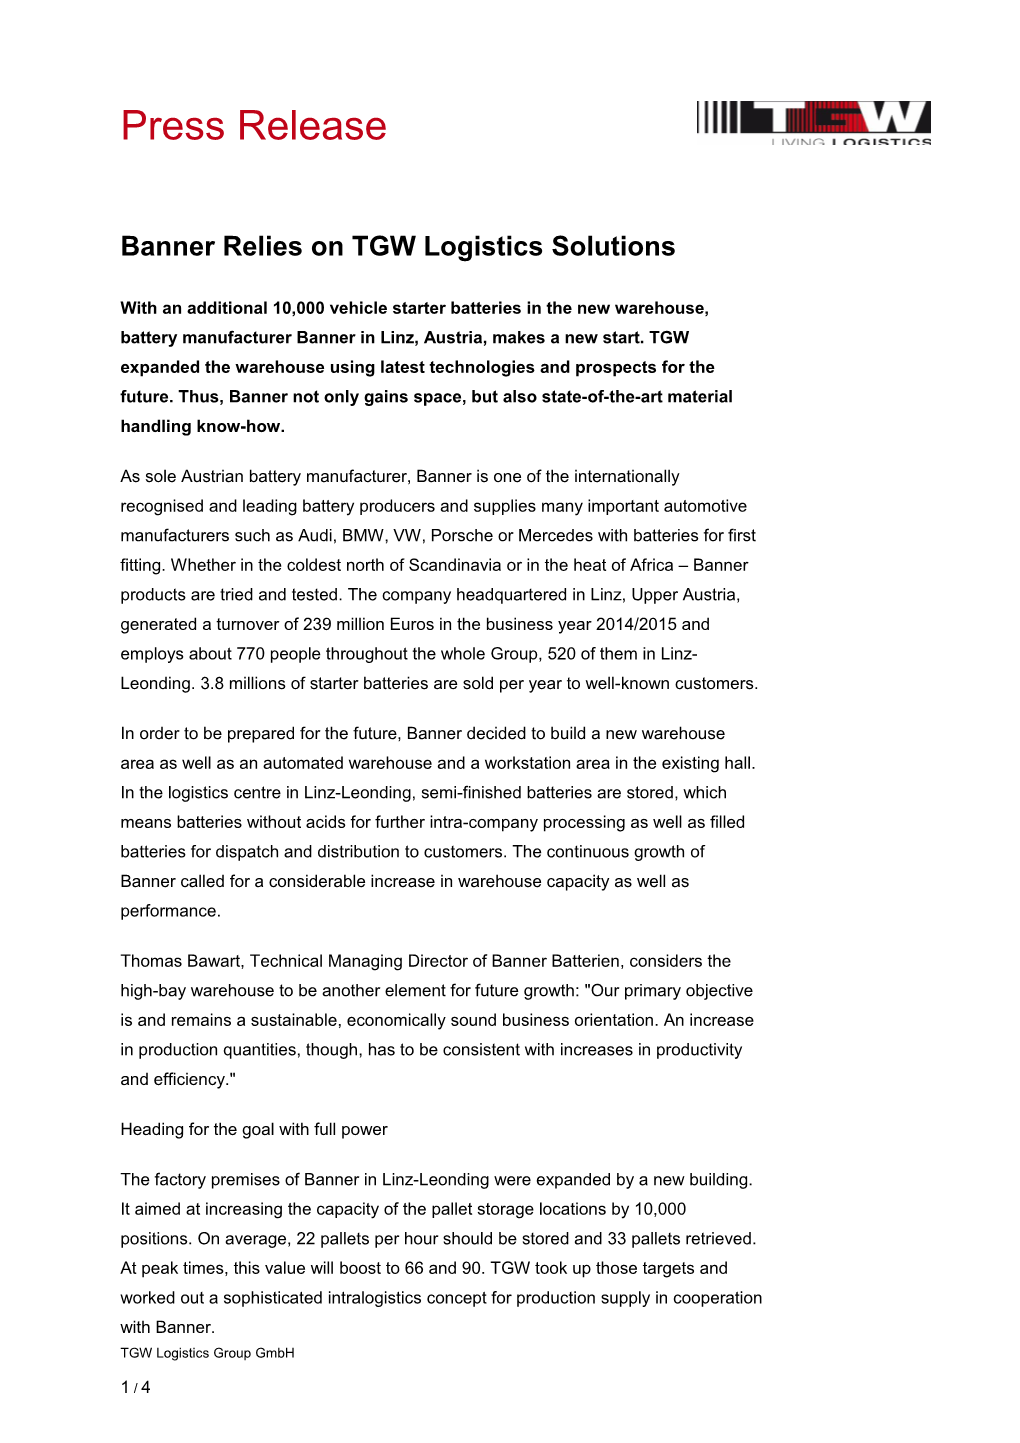 Banner Relies on TGW Logistics Solutions